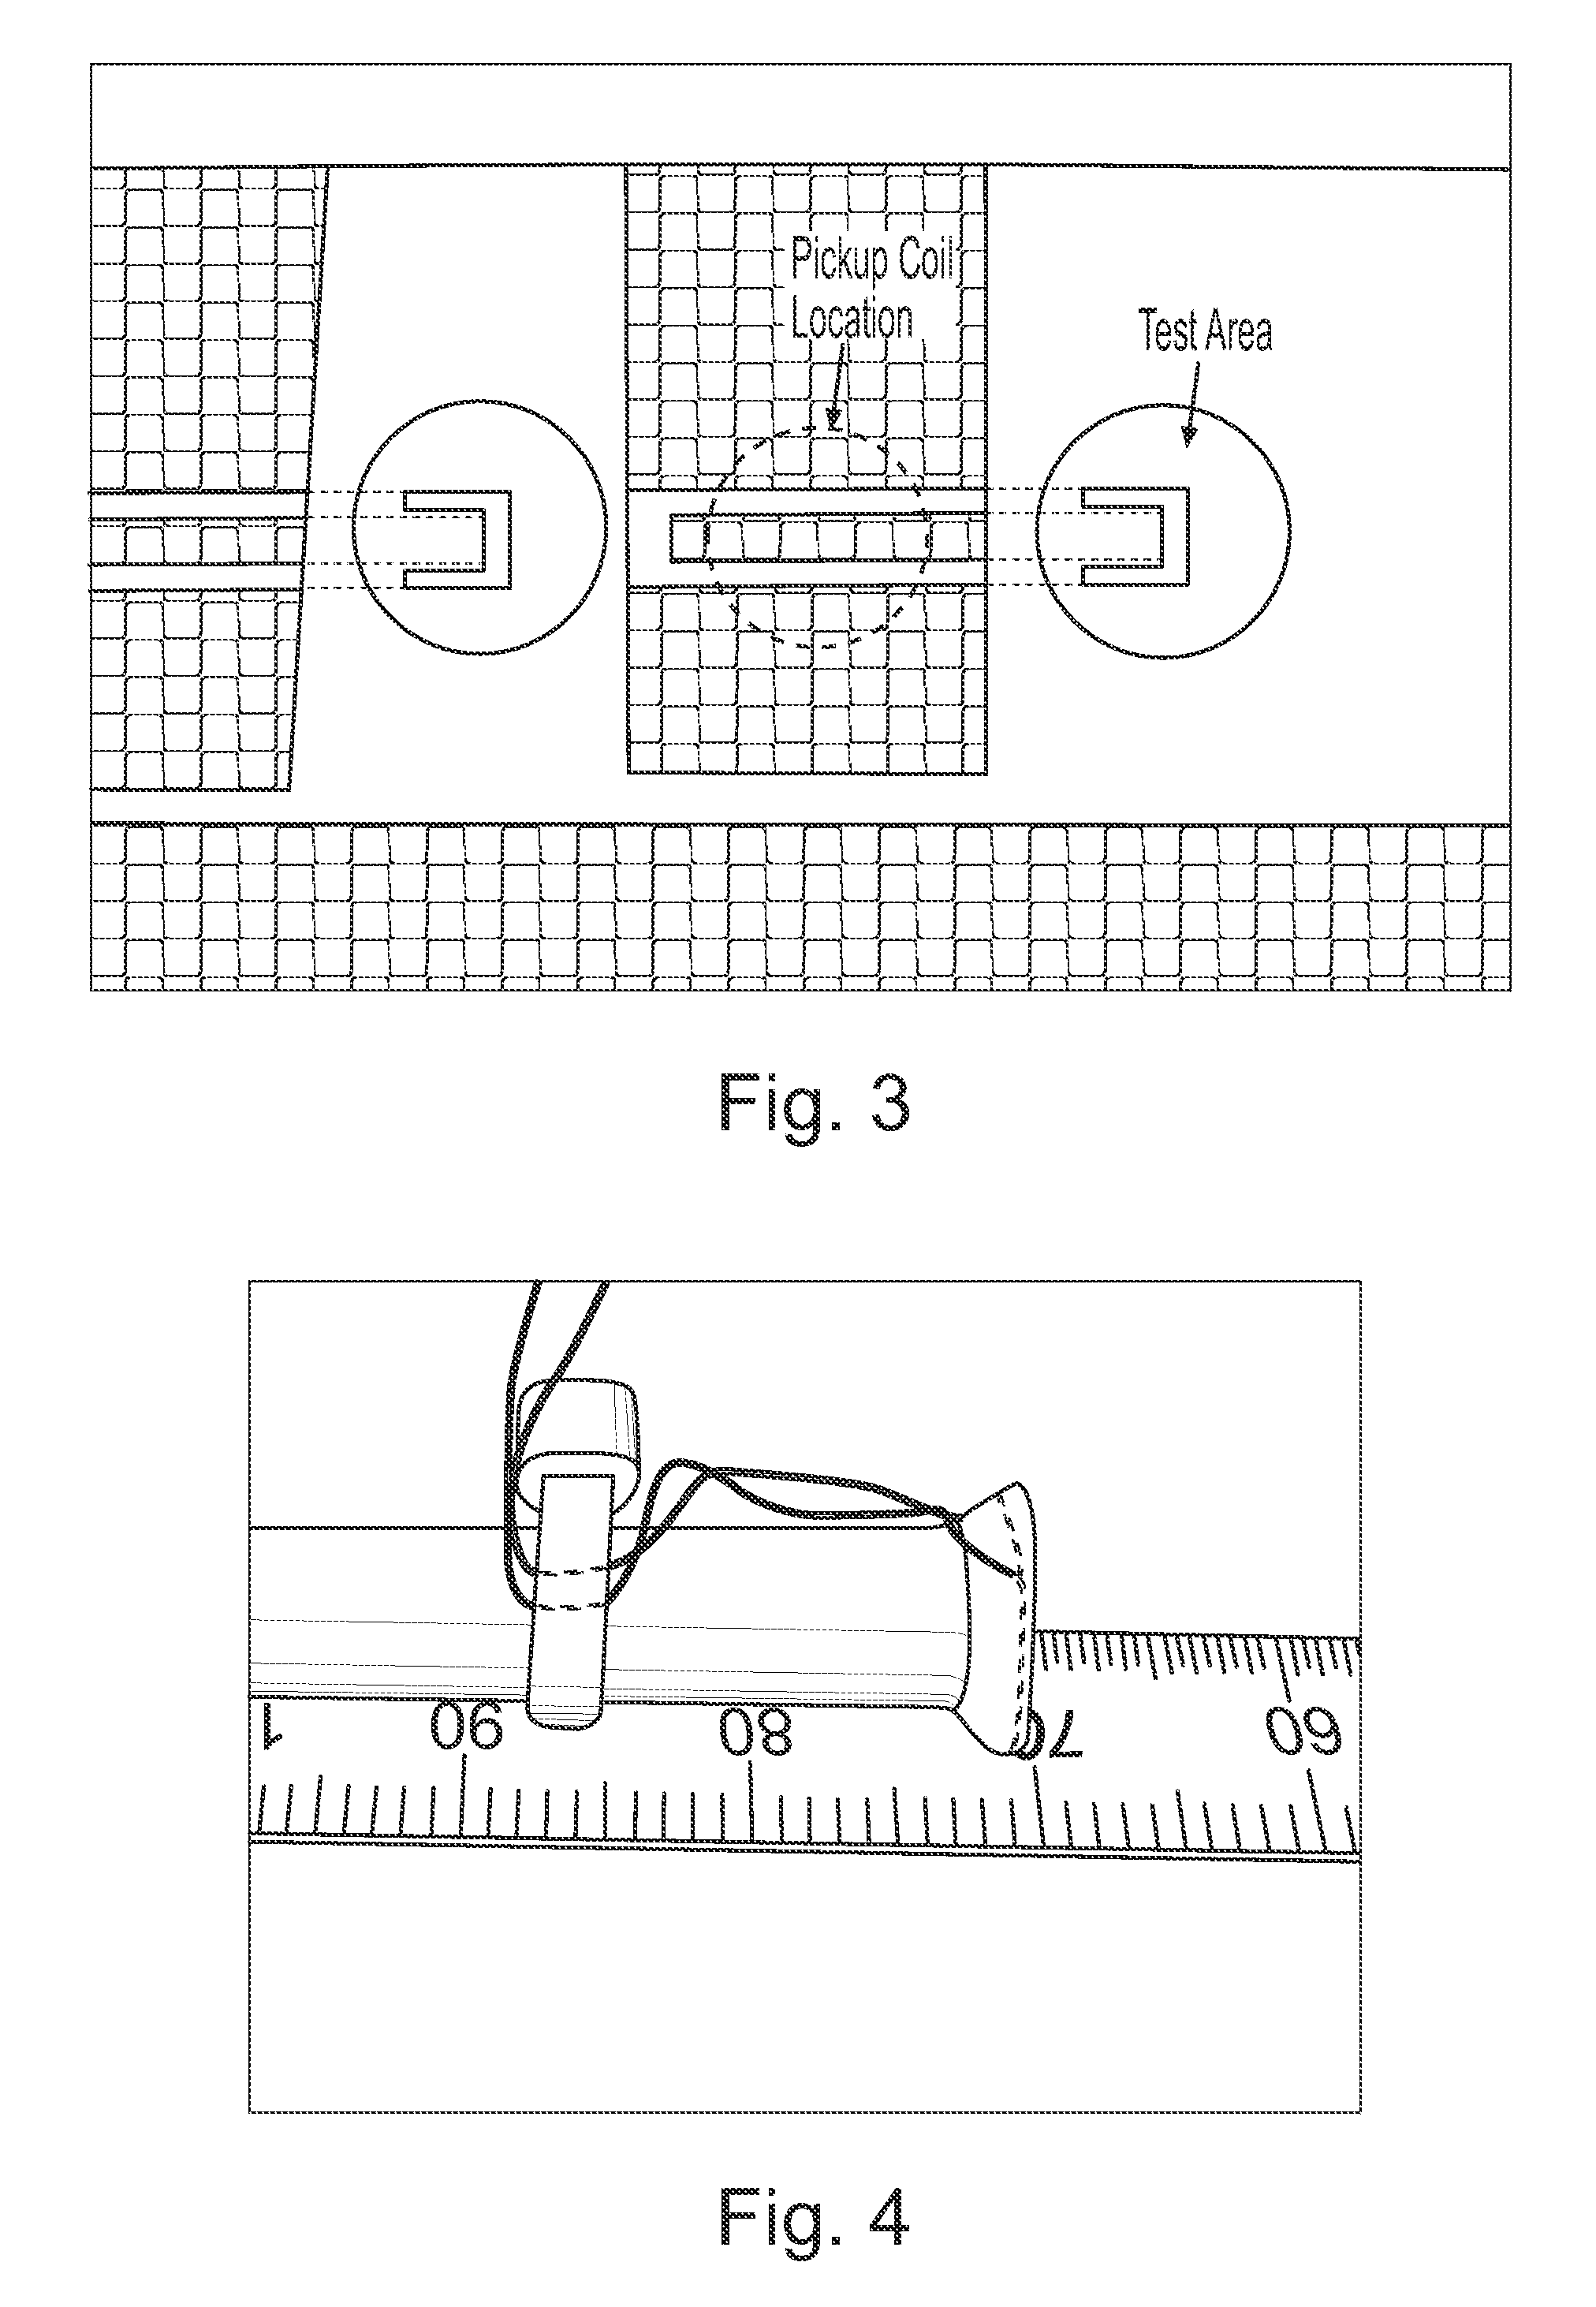 Apparatus and method for non-destructive testing